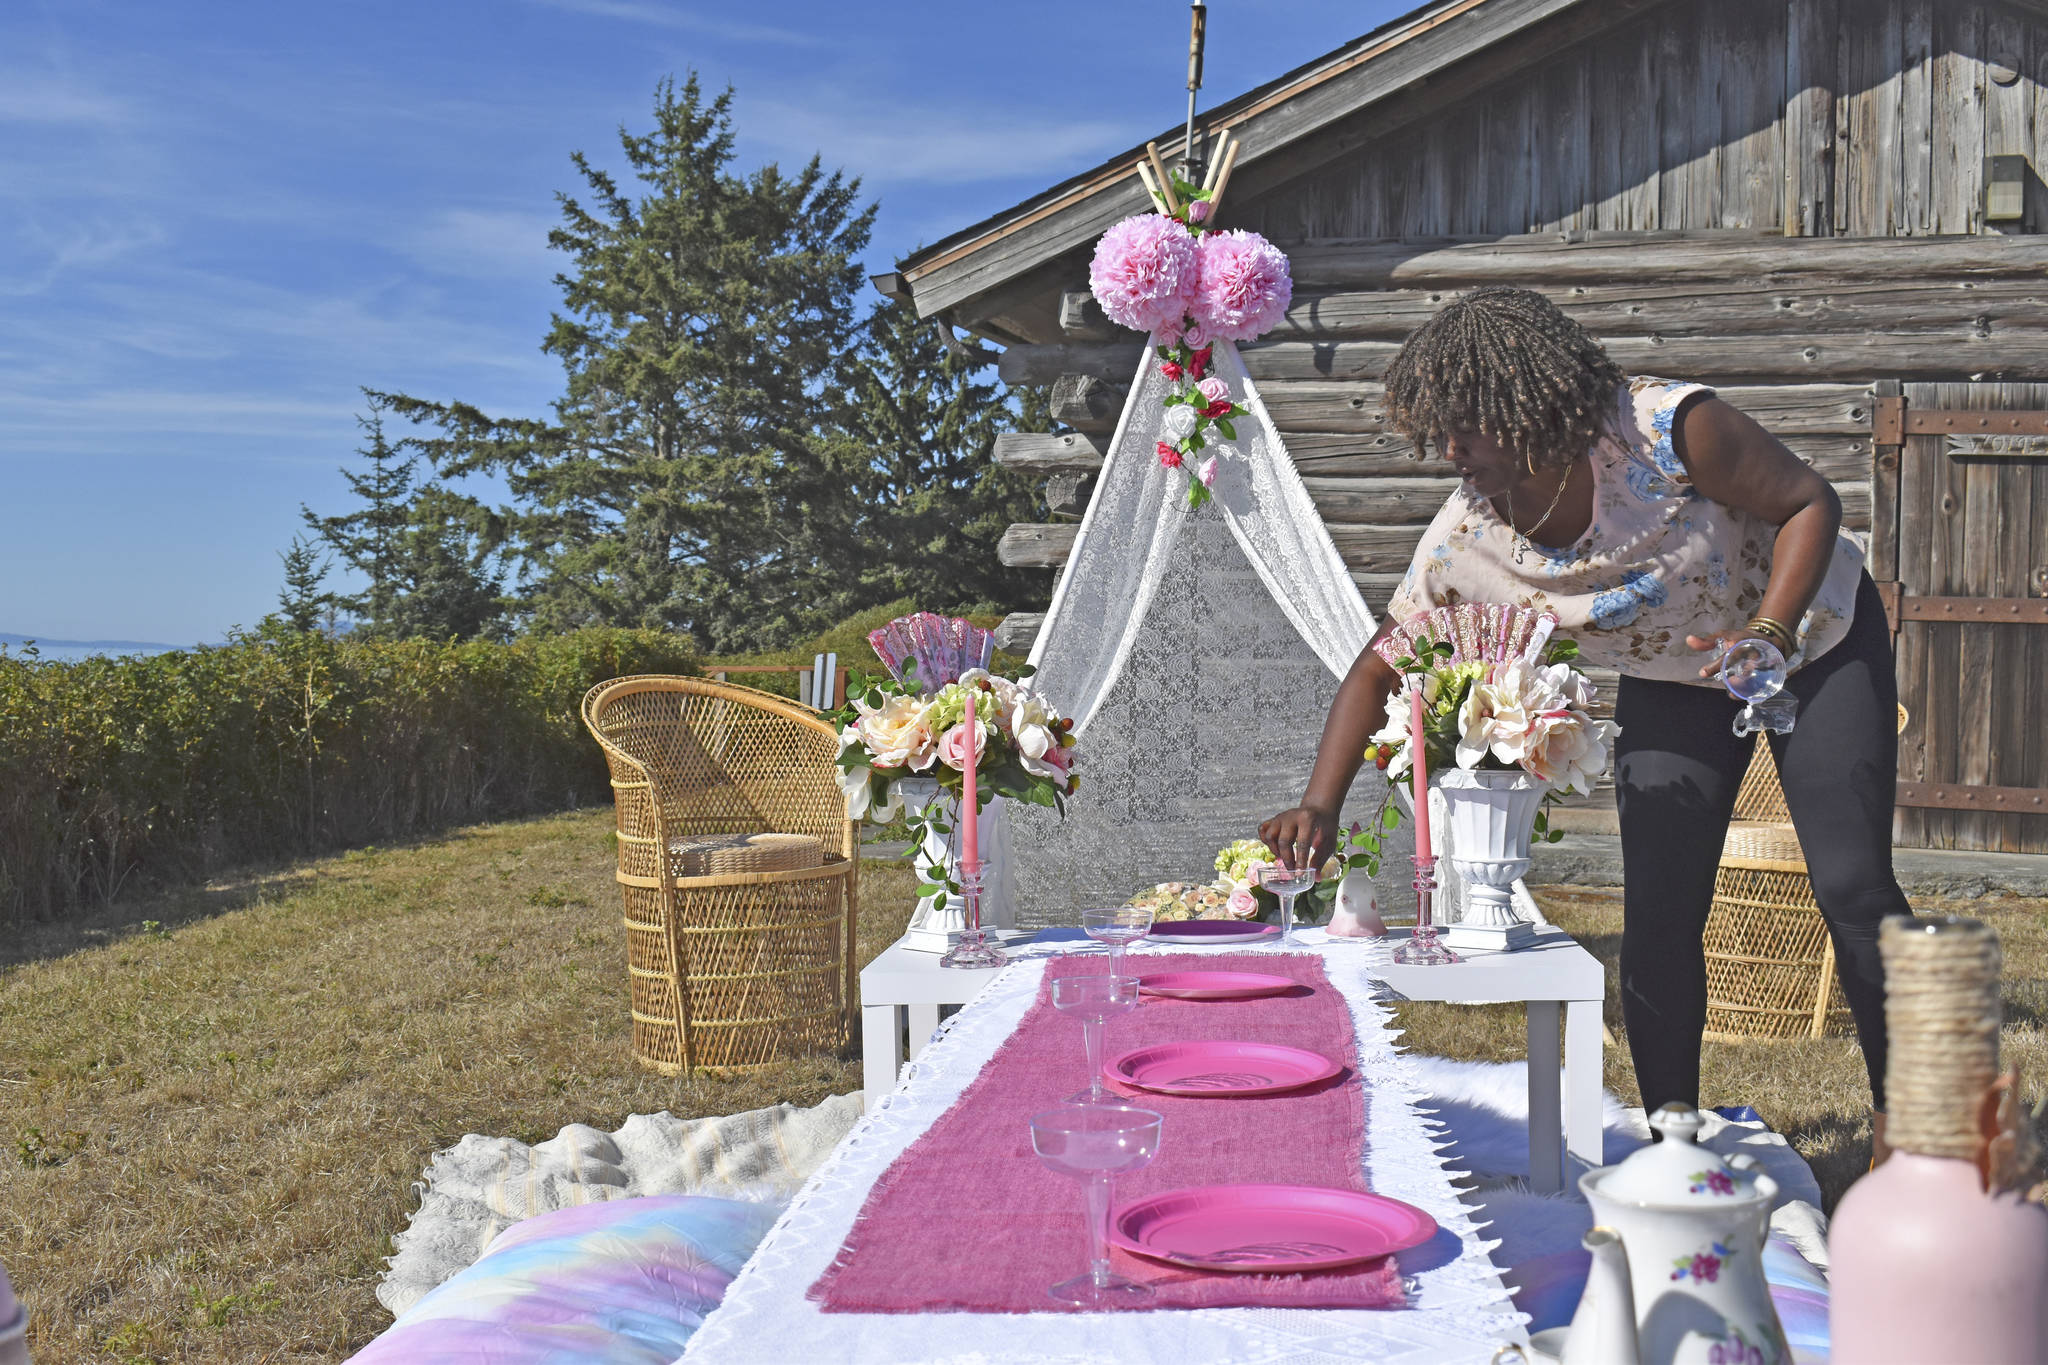 Photo by Emily Gilbert/Whidbey News-Times
Cadesha Pacquette sets up a pop-up picnic spread similar to one she created for a young girl’s birthday party. Pacquette said her new venture has been popular with military families celebrating a spouse’s return from deployment, anniversaries or just to have fun outdoors.